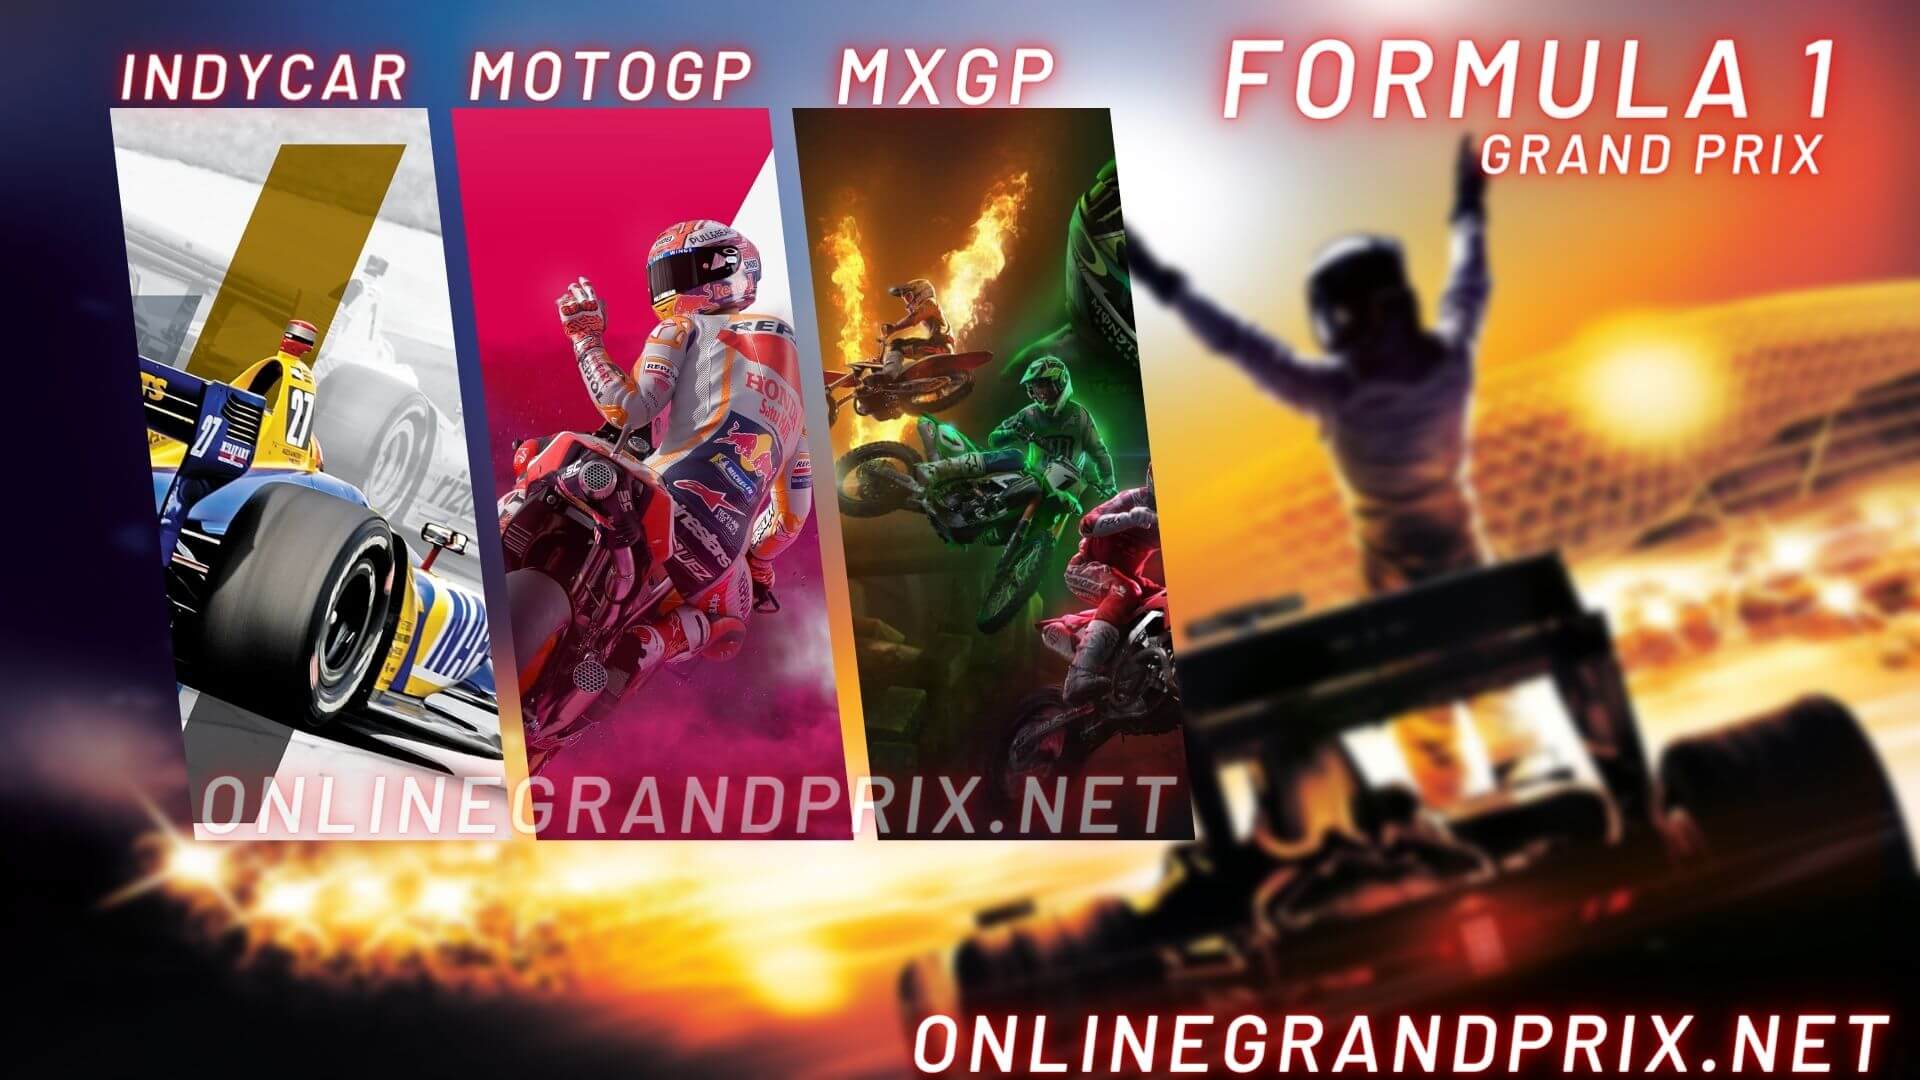 live-south-african-motorcycle-grand-prix-stream-online